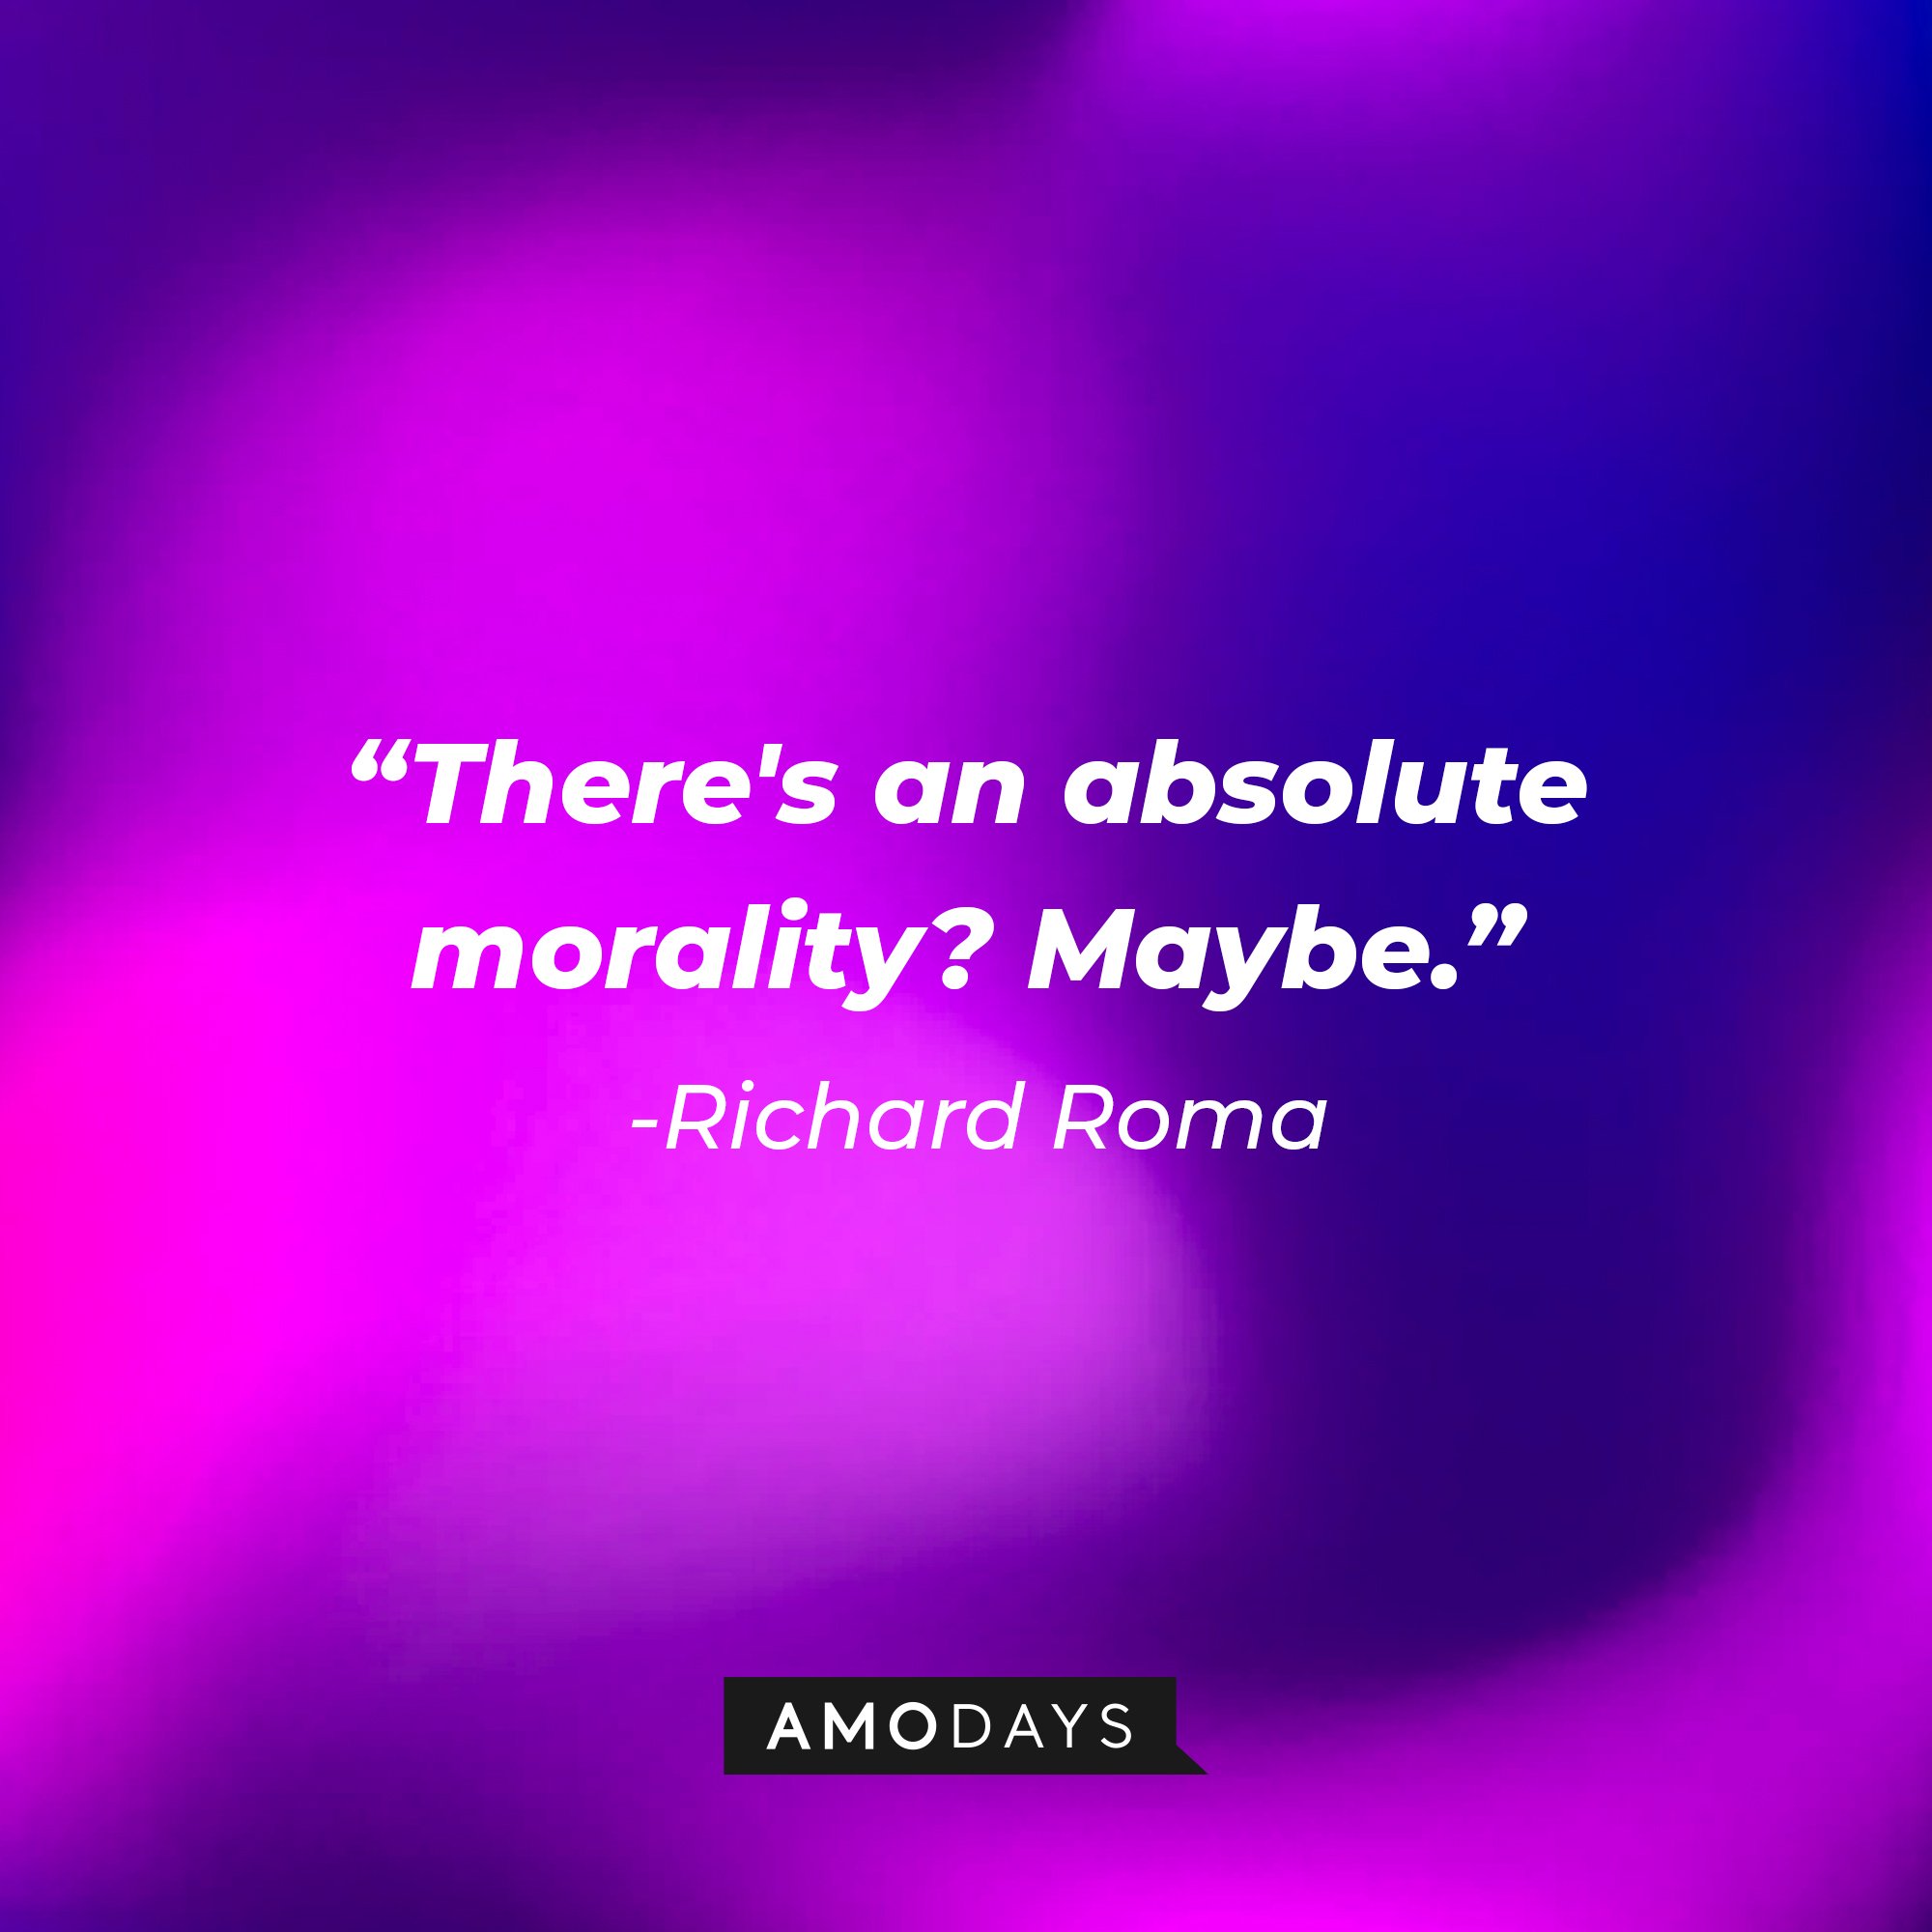 Richard Roma's quote: "There's an absolute morality? Maybe." | Image: AmoDays